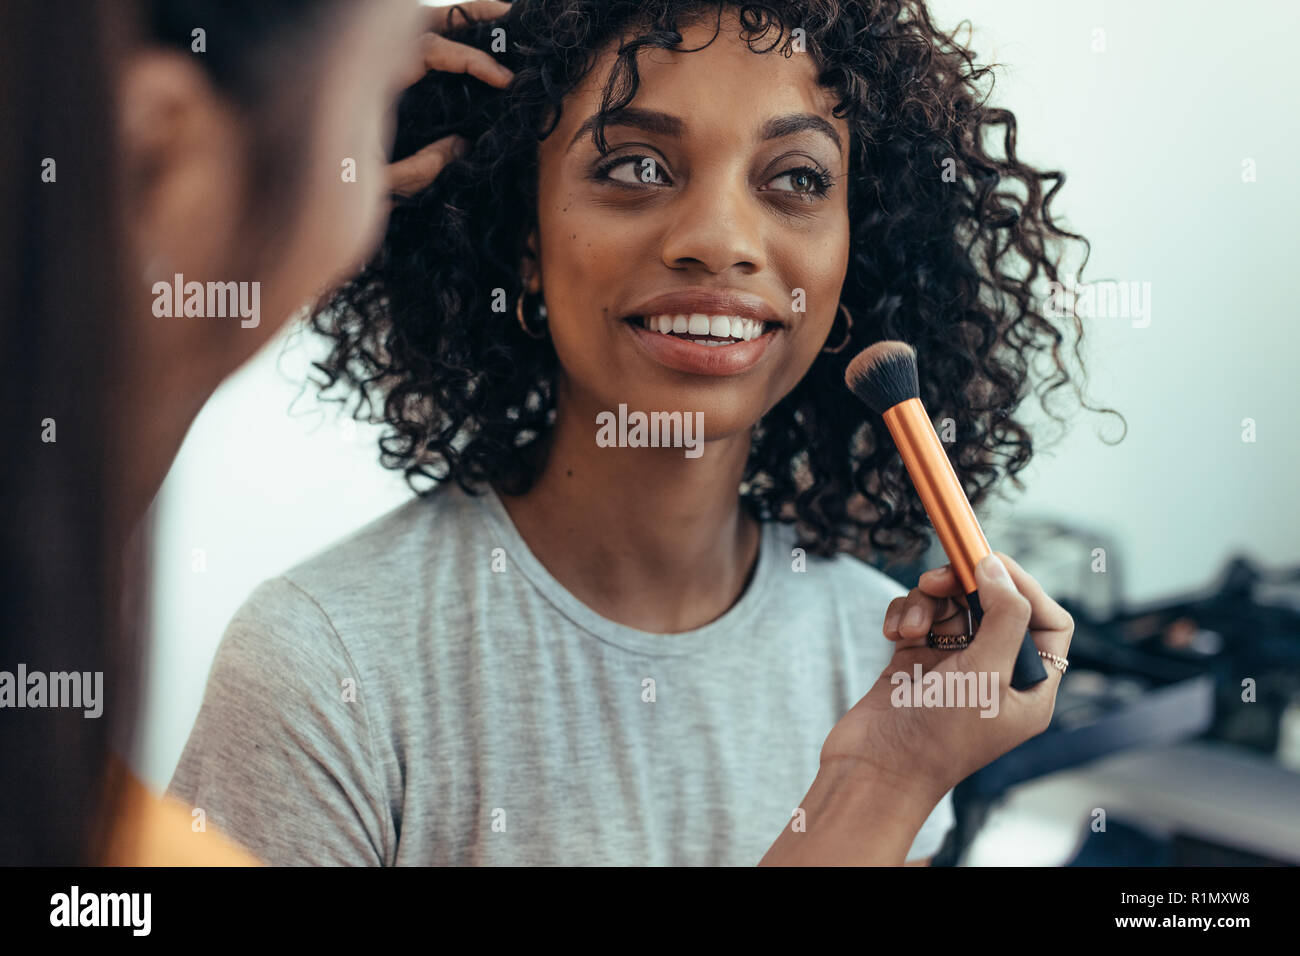 makeup artist preparing a model for a photo shoot. Close up of a model getting ready for photo shoot. Stock Photo